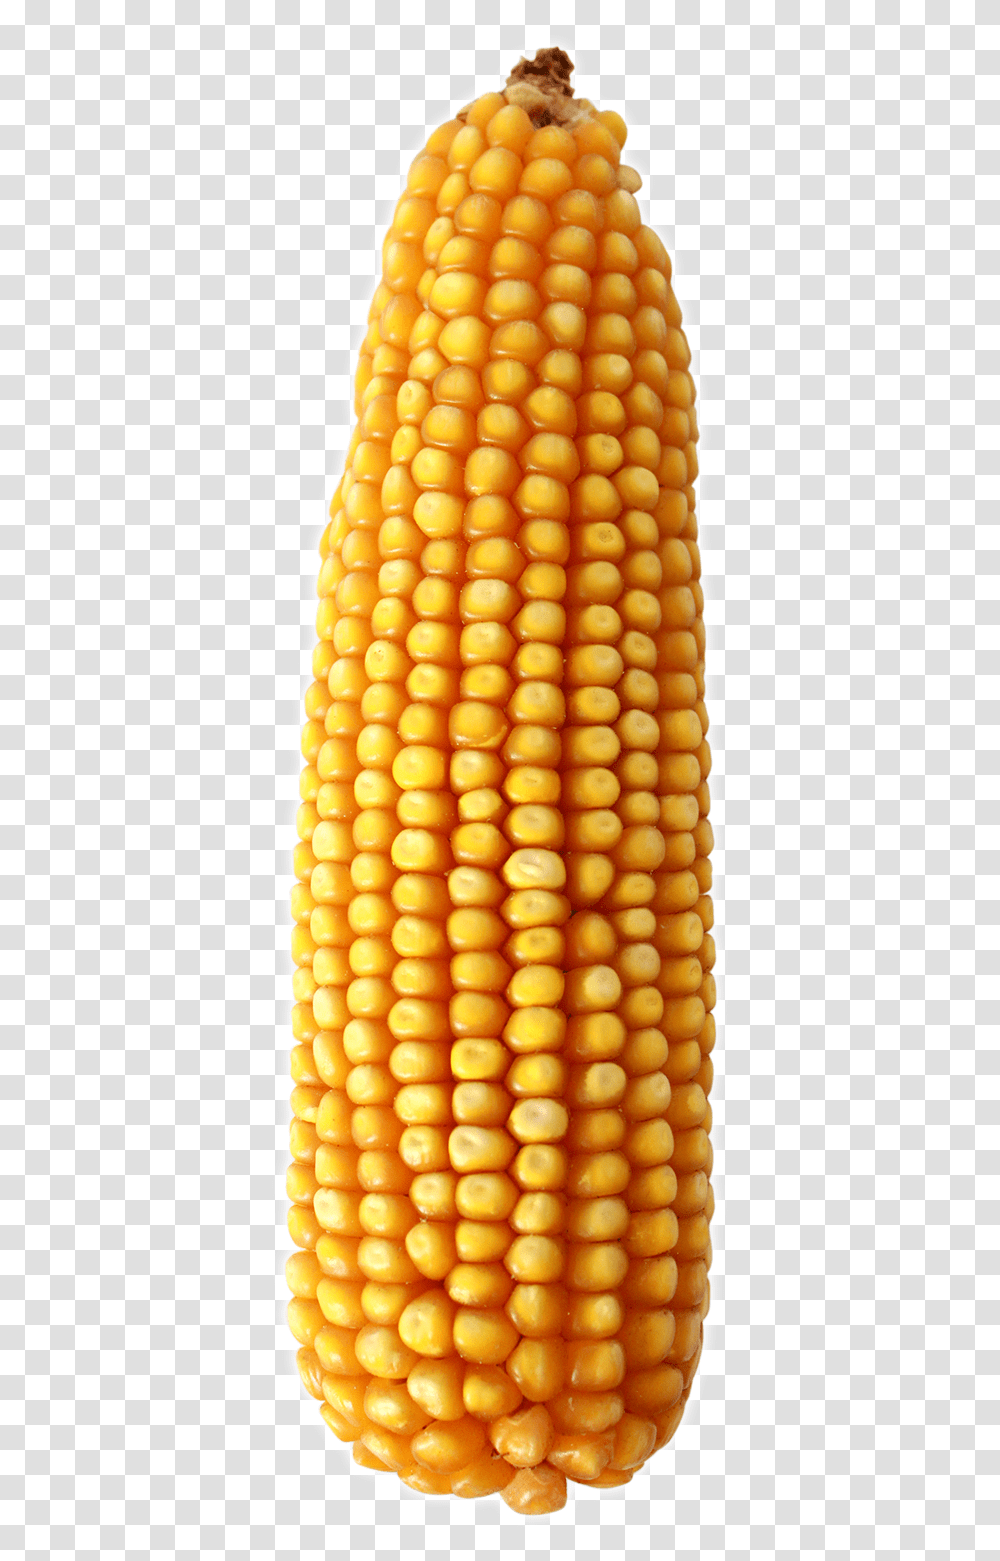 Maize Download Corn On The Cob, Plant, Vegetable, Food, Pineapple Transparent Png